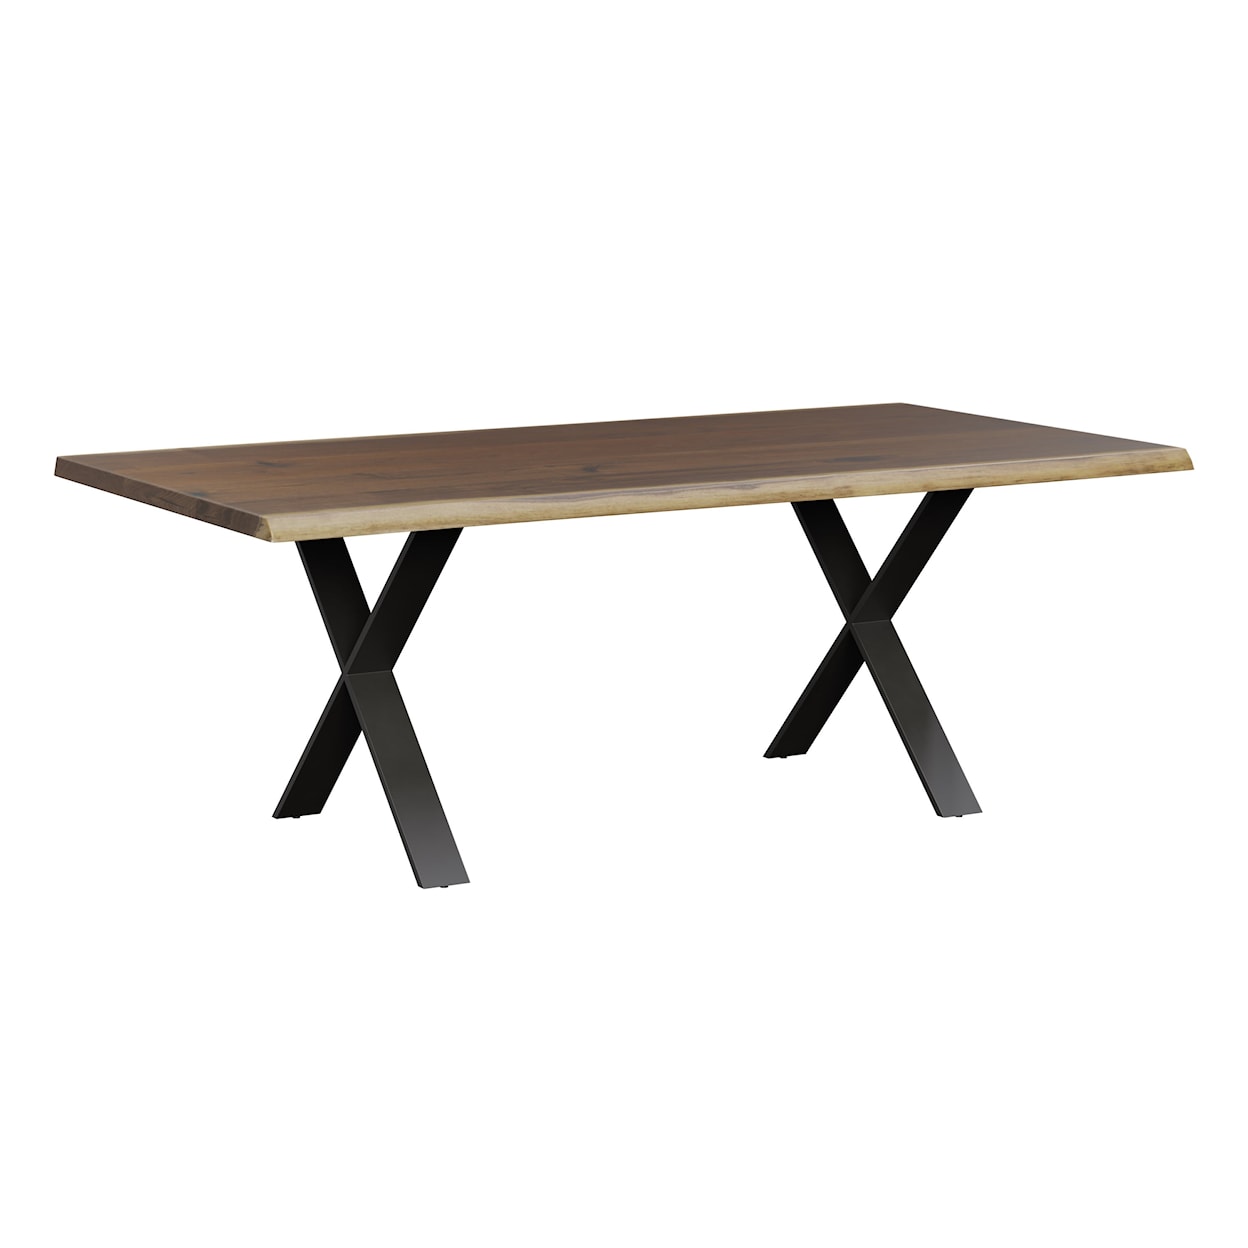 Canal Dover Furniture Bordeaux Live Edge Dining Table - X Base